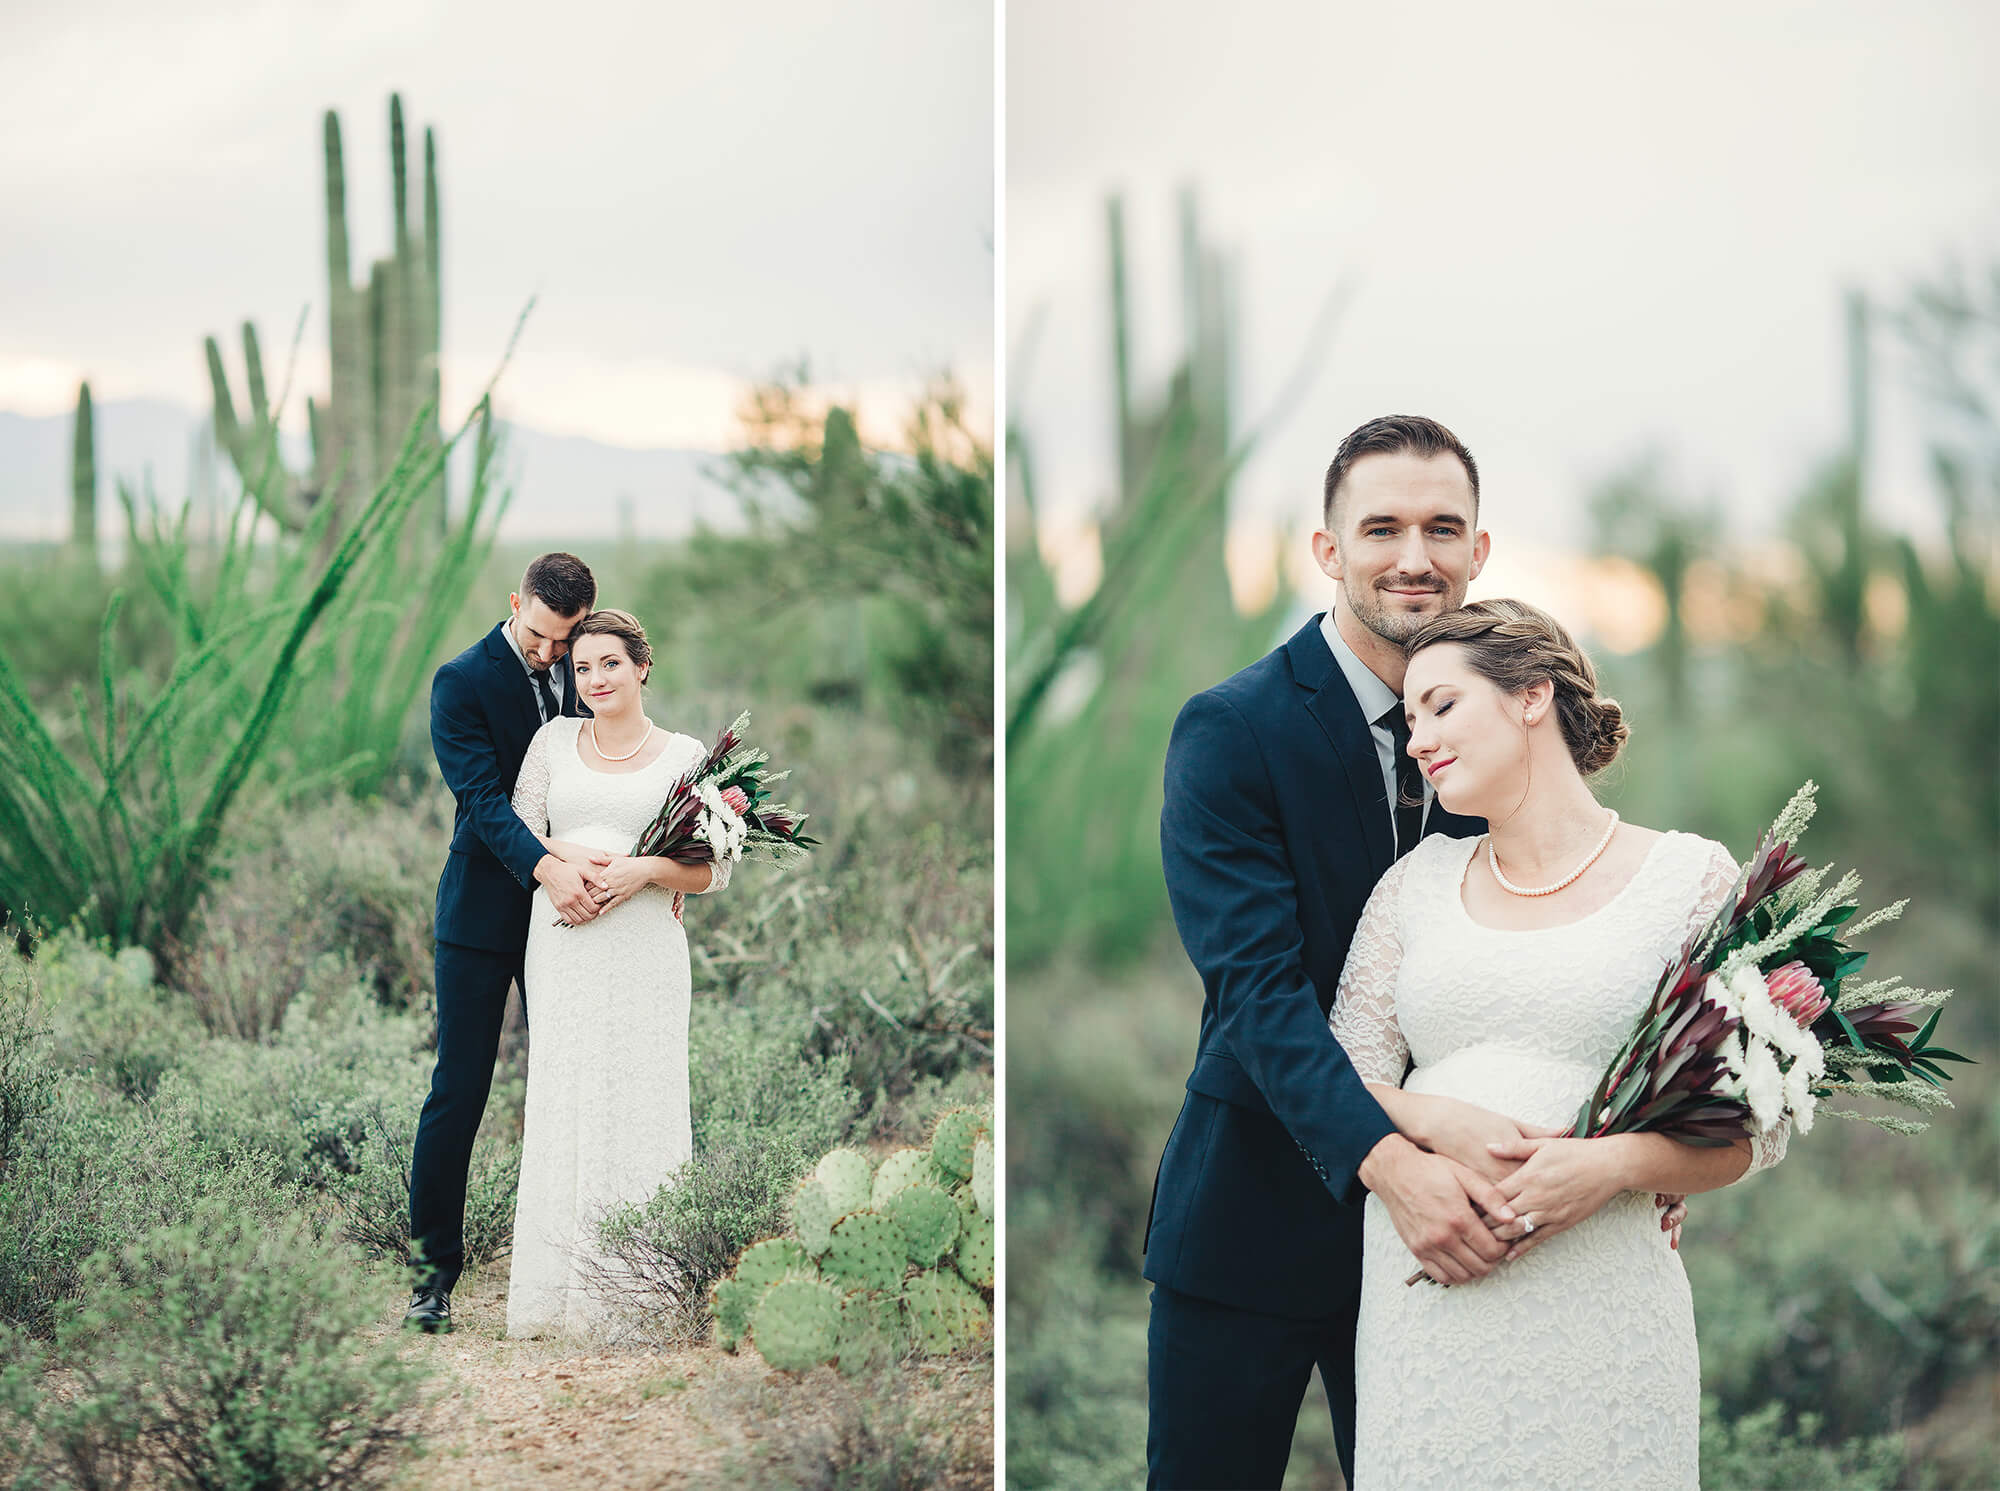 A beautiful day for this beautiful couple of Amanda and Kenneth following their desert elopement ceremony.